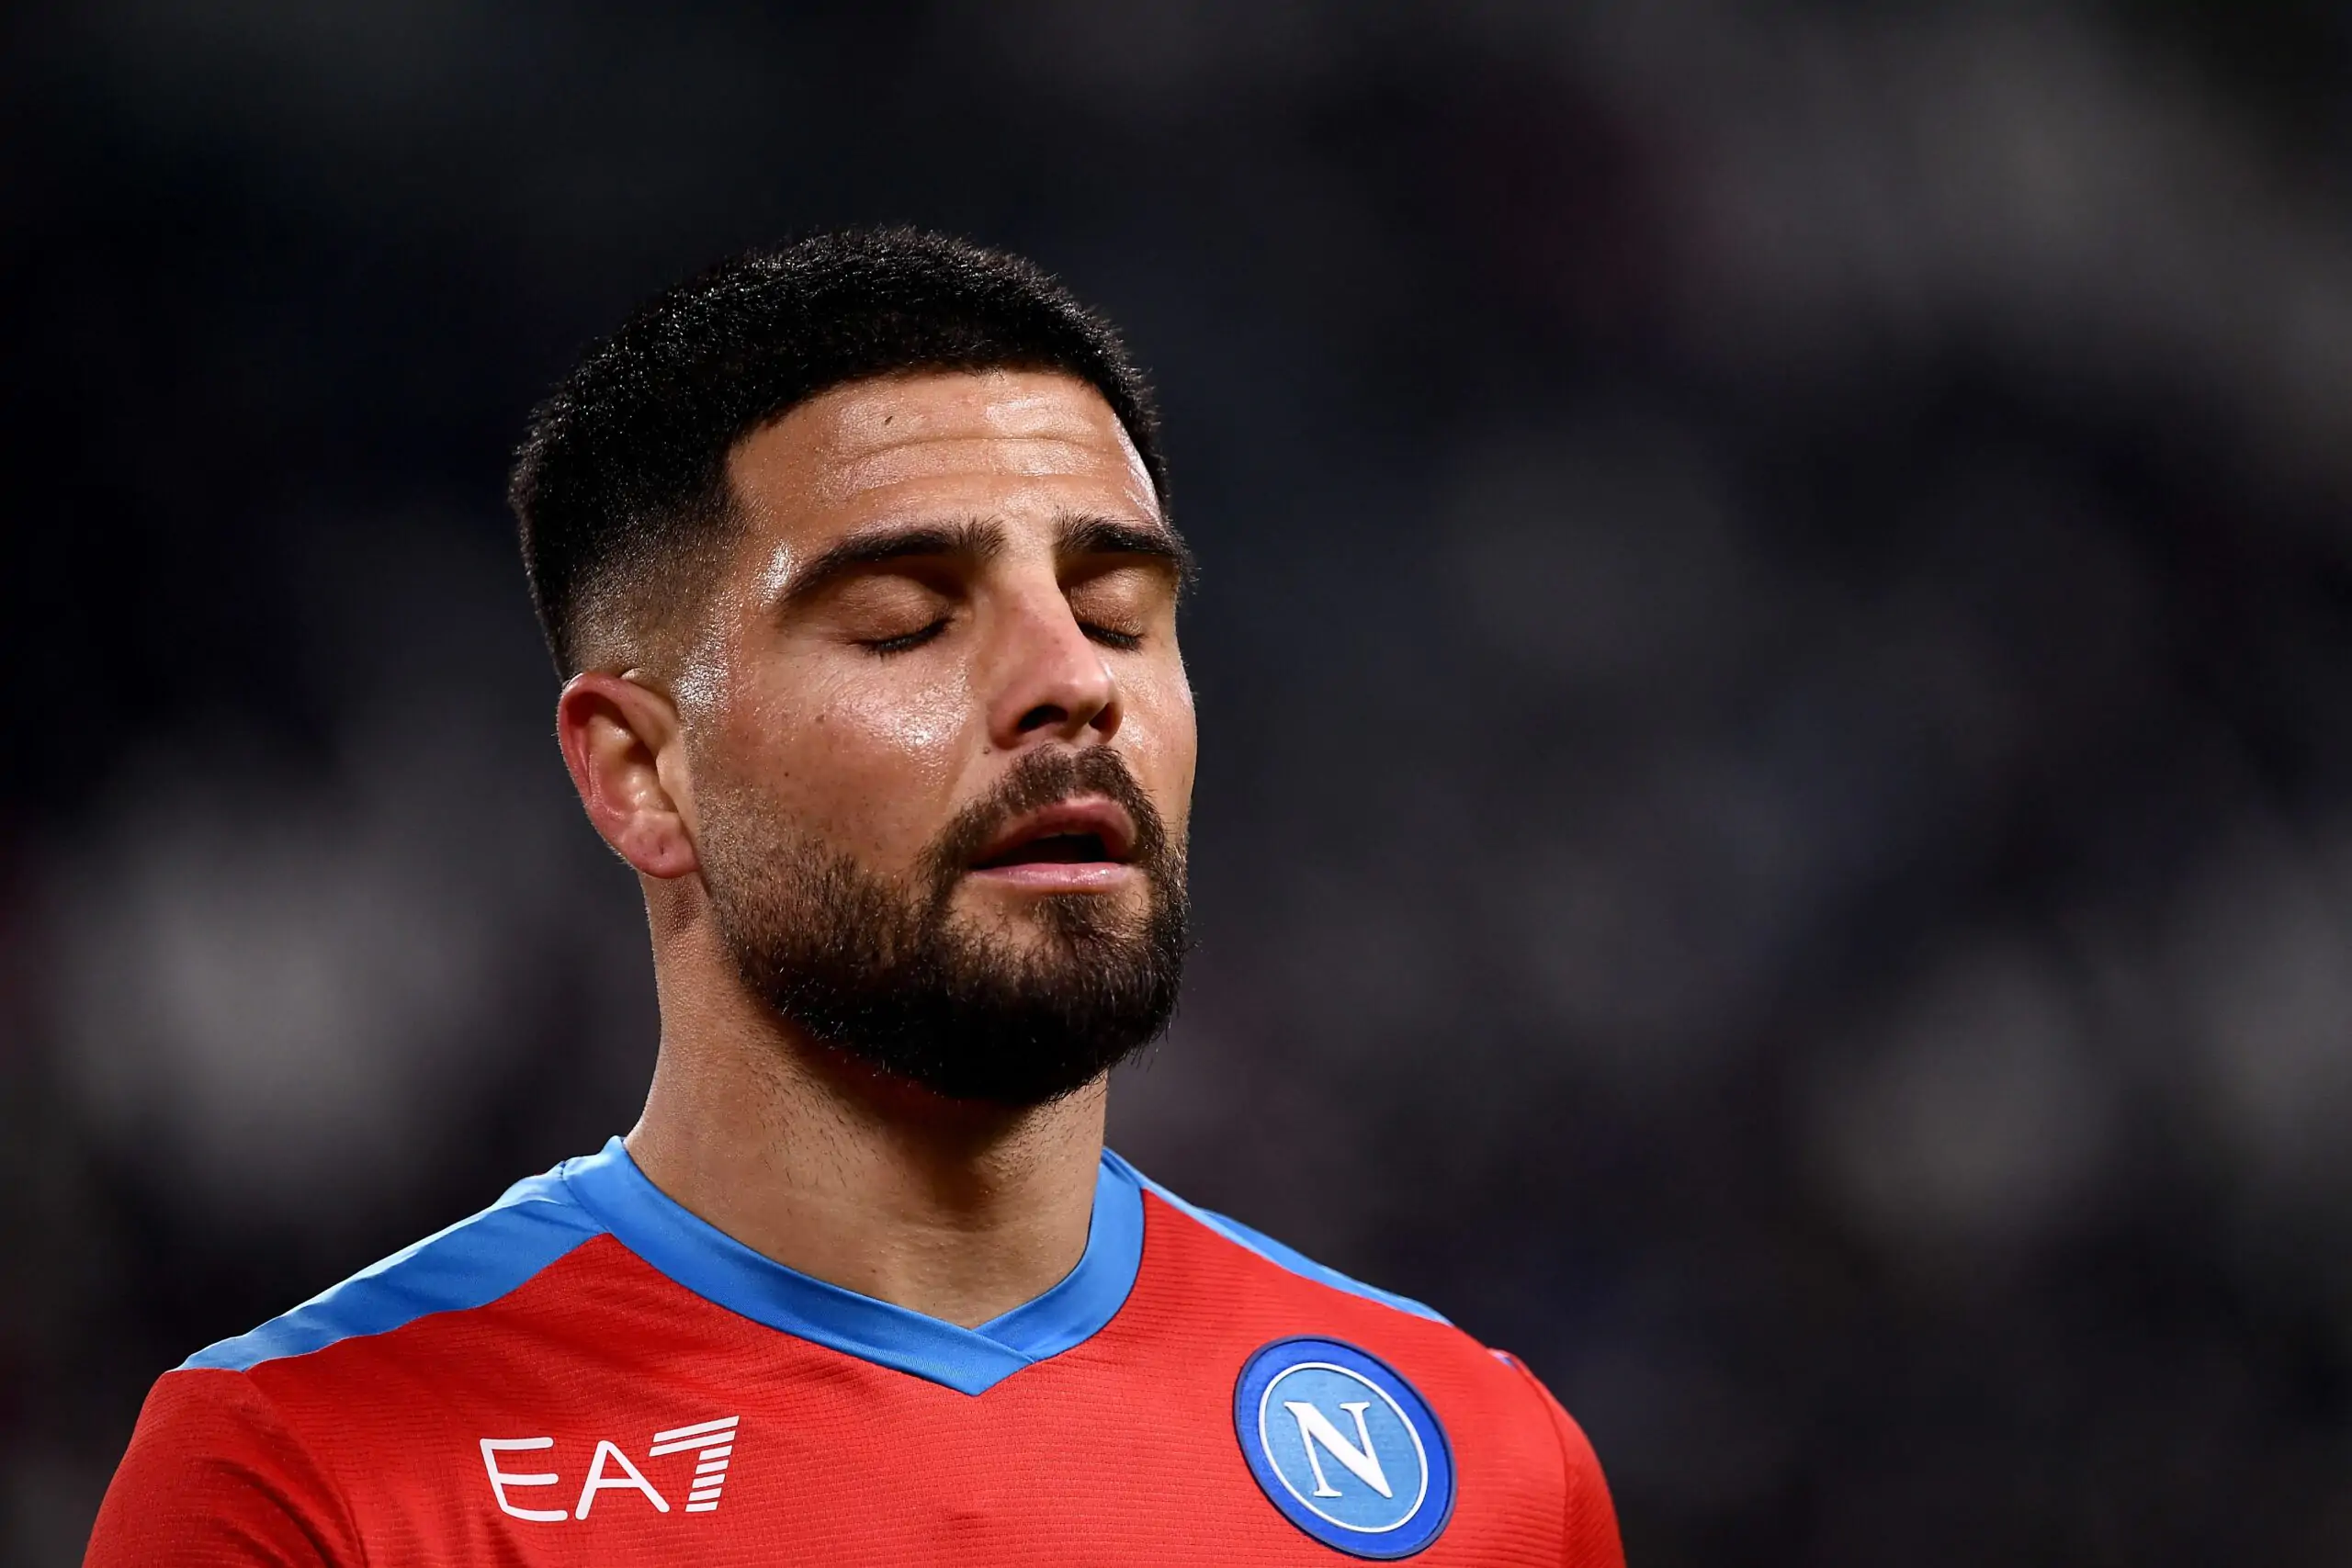 Insigne is reportedly confident of possessing more than enough in his striking arsenal to make a difference back in Serie A, with two clubs in the running.